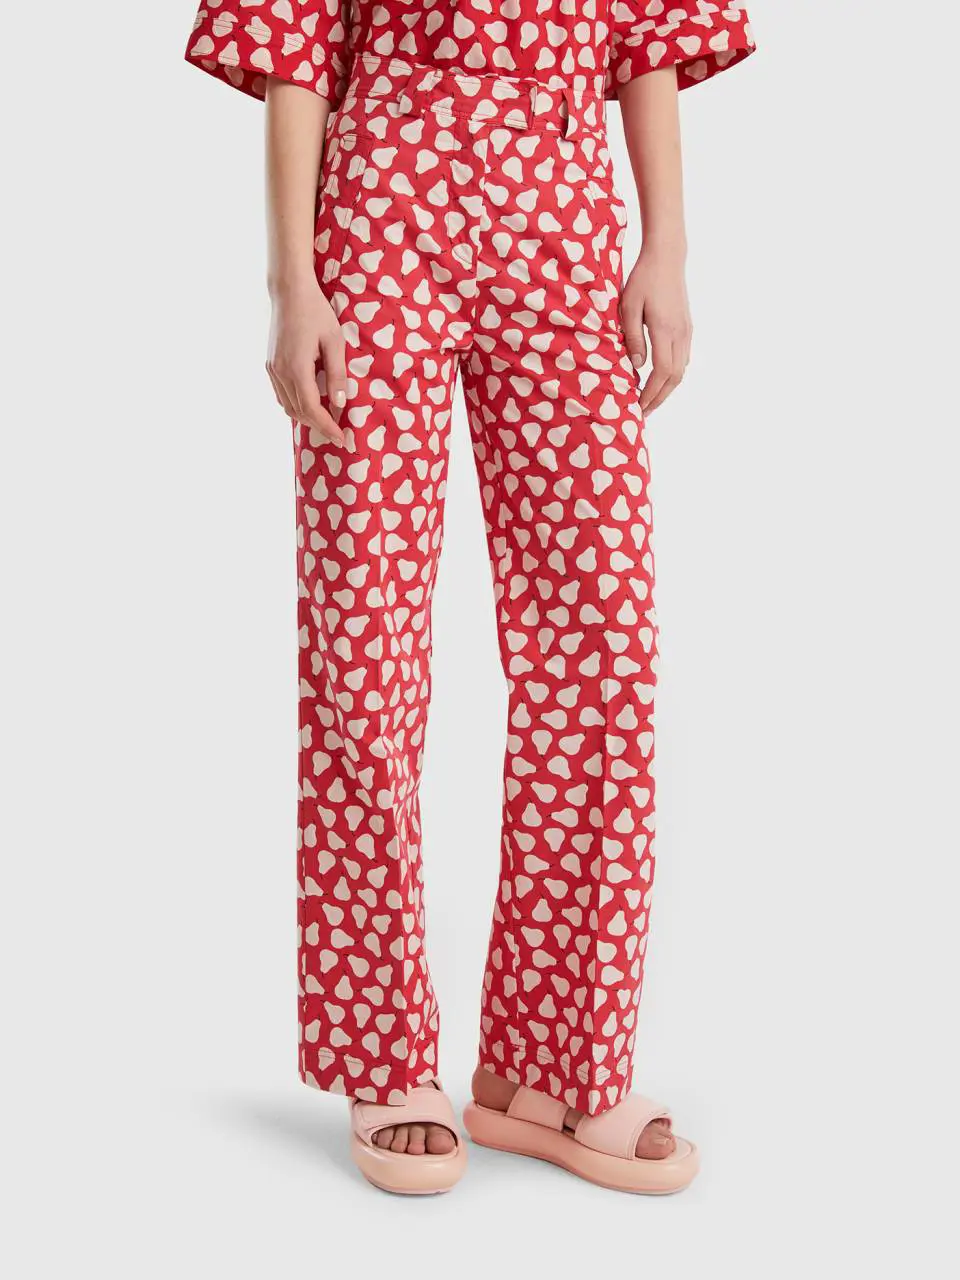 Benetton red palazzo trousers with pear pattern. 1